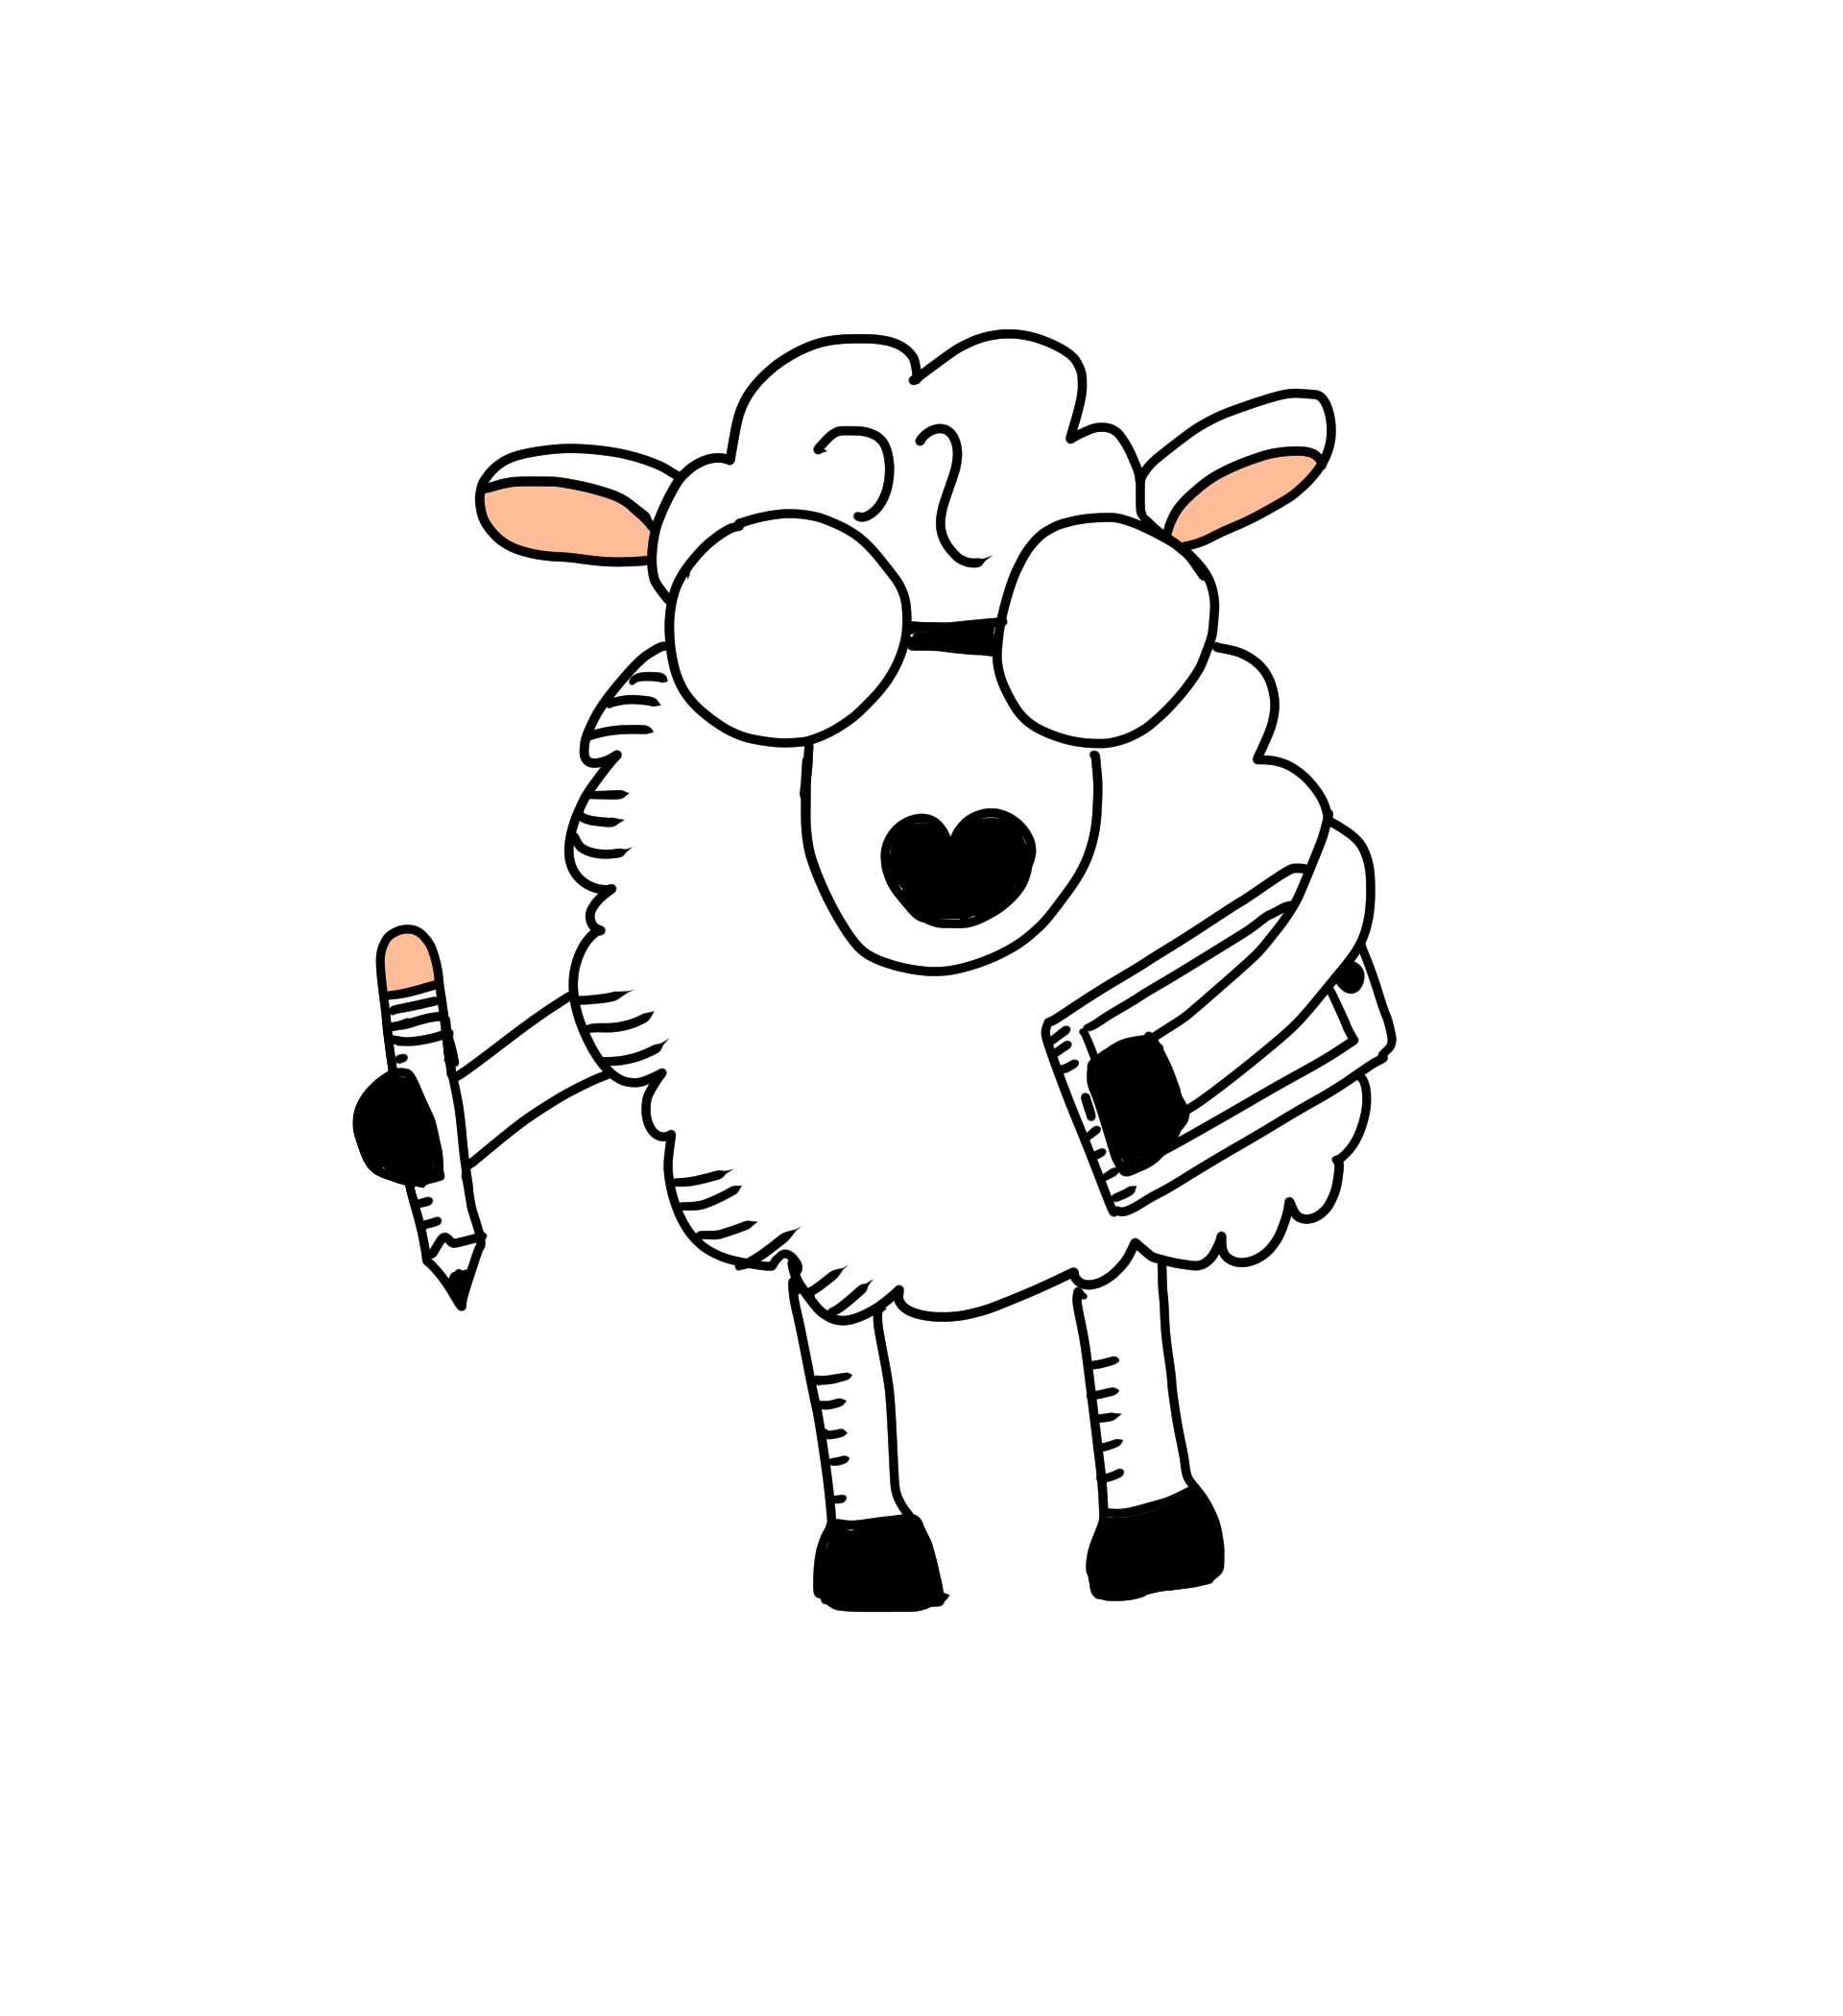 Drawing of cartoon sheep Analytical Animal as a strategic planning consultant for animal protection